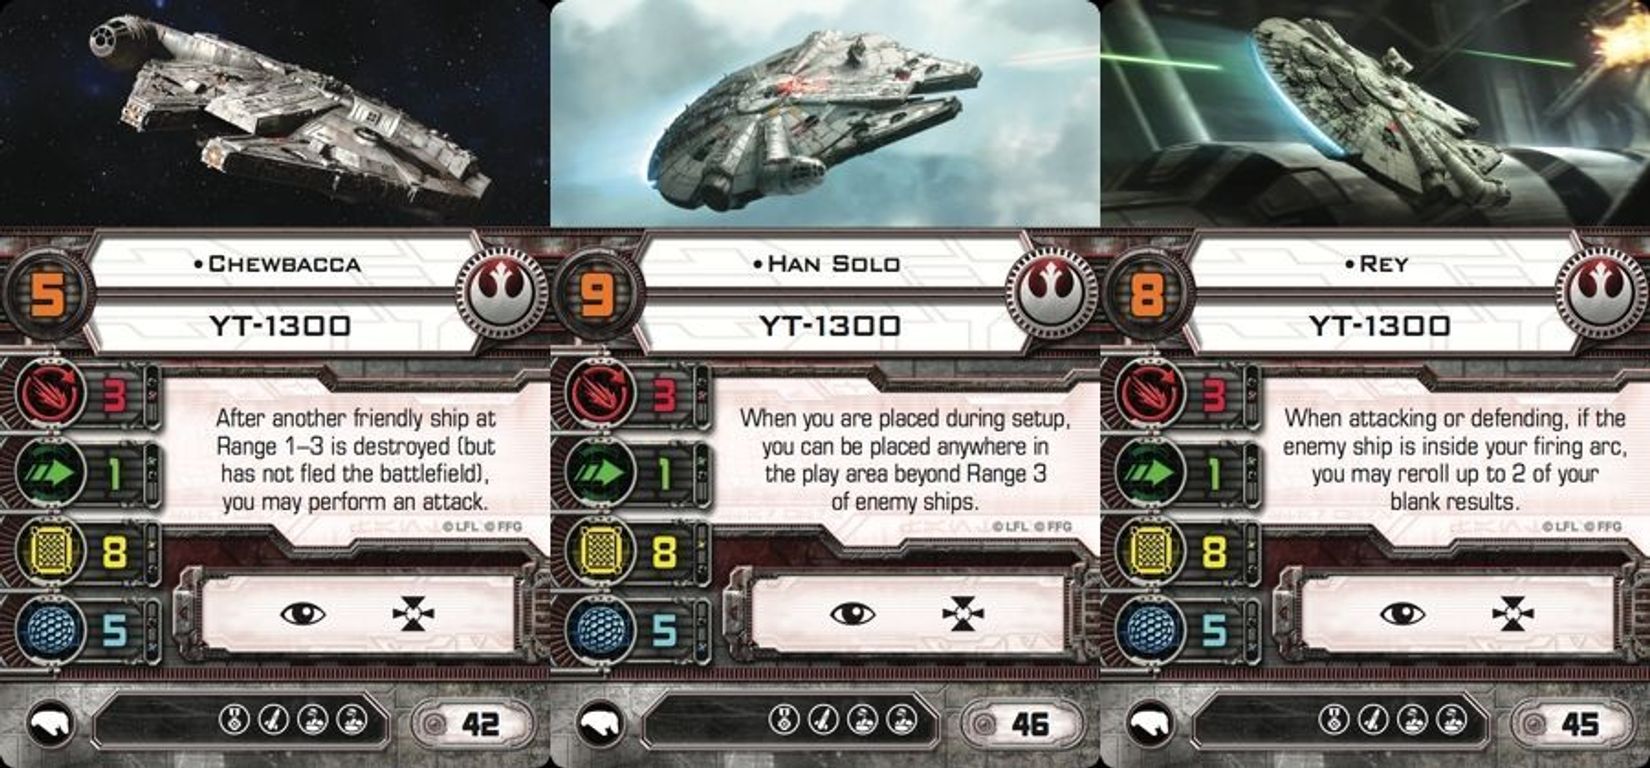 Star Wars: X-Wing Miniatures Game - Heroes of the Resistance Expansion Pack cards